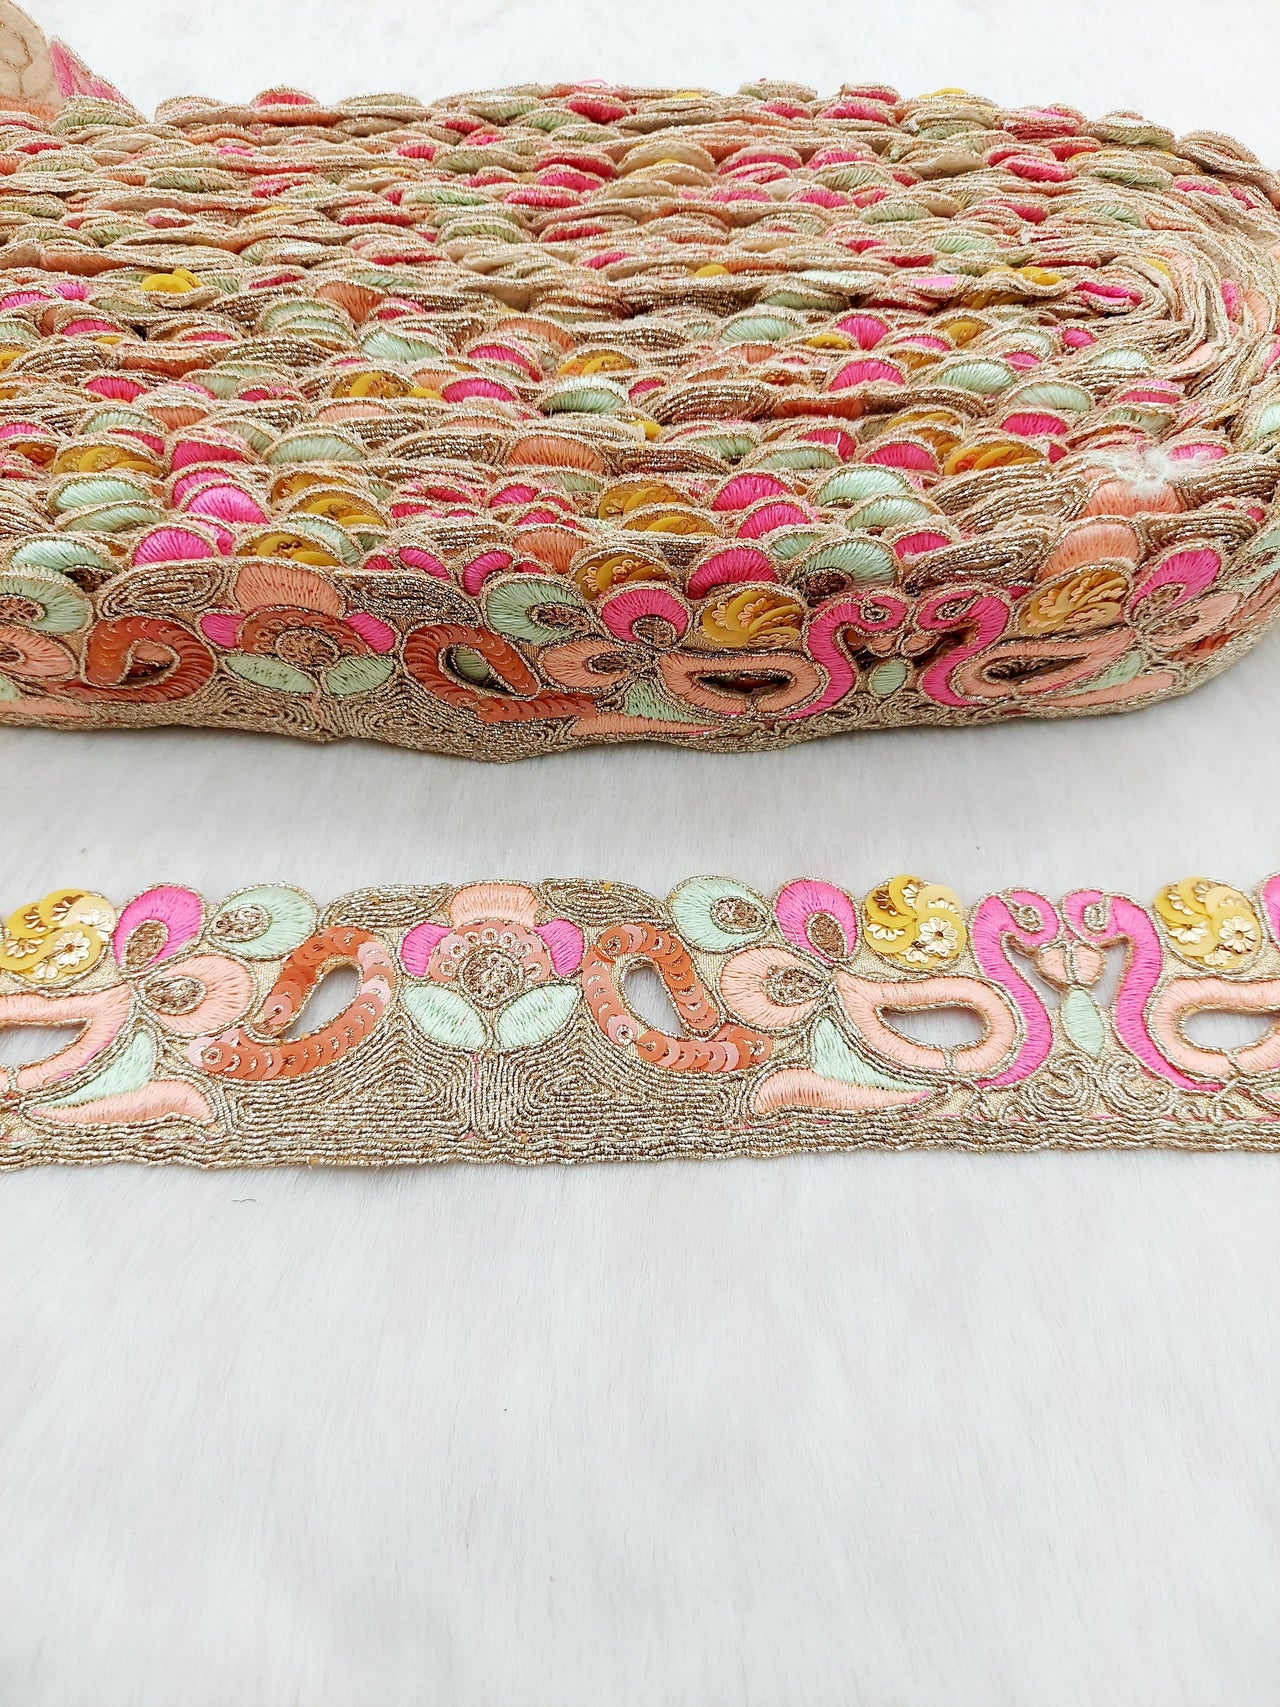 Cutwork Lace Trim With Intricate Hand Embroidered Swans In Pink and Zardozi Embroidery, Floral Trims, Sari Border